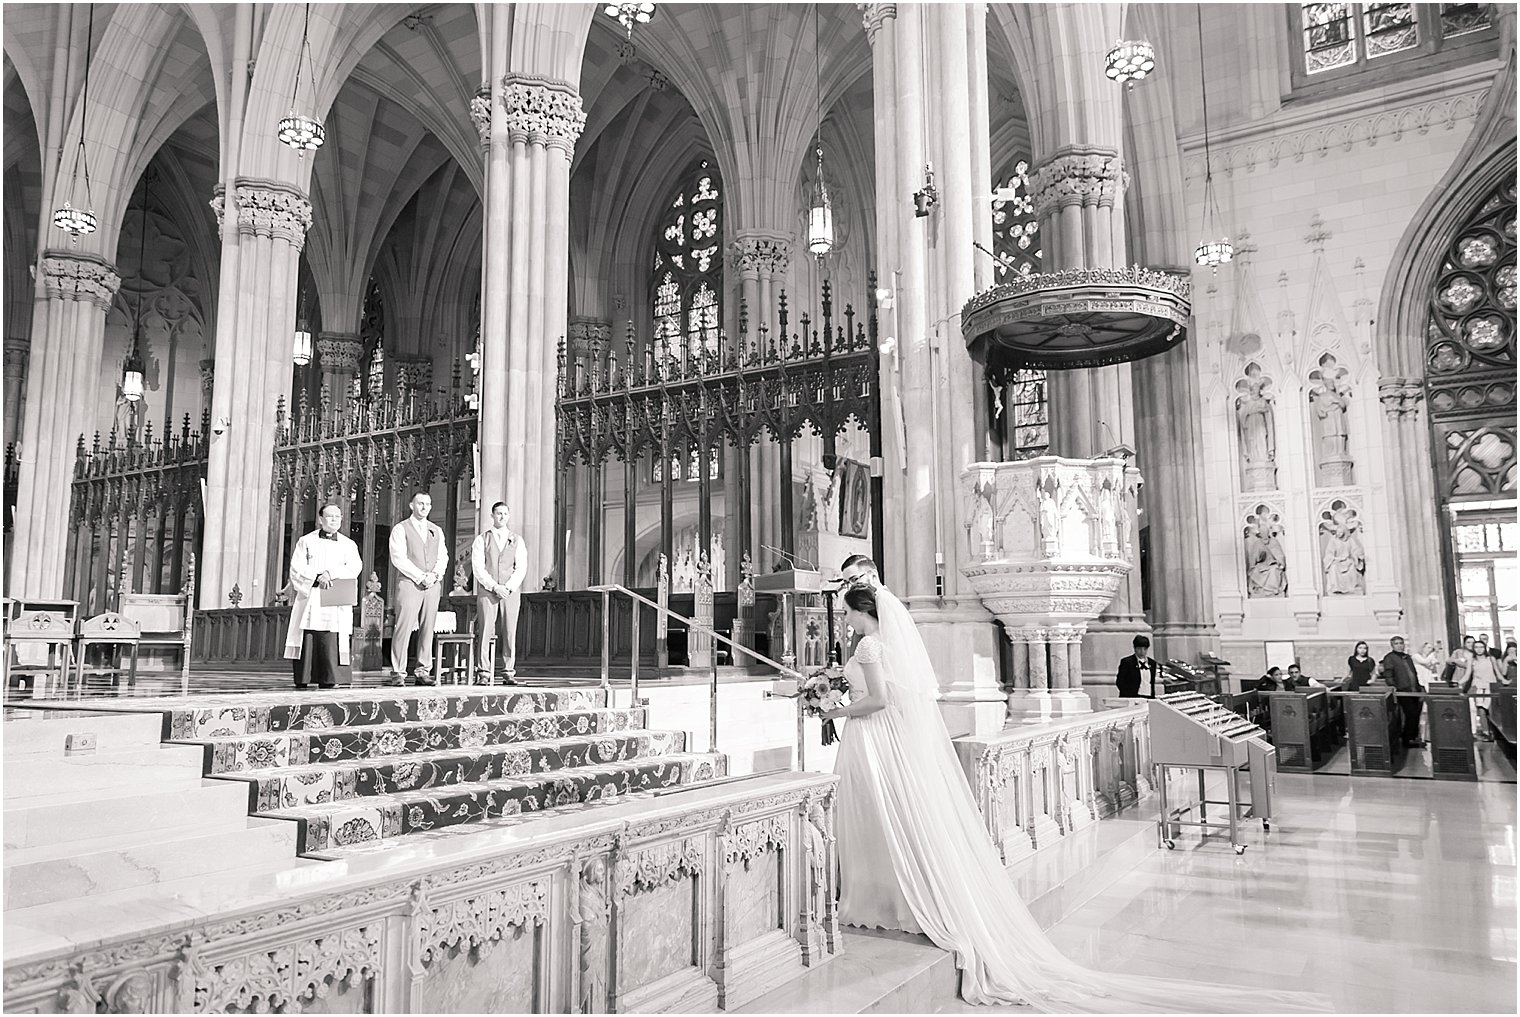 Wedding Ceremony at St. Patrick's Cathedral